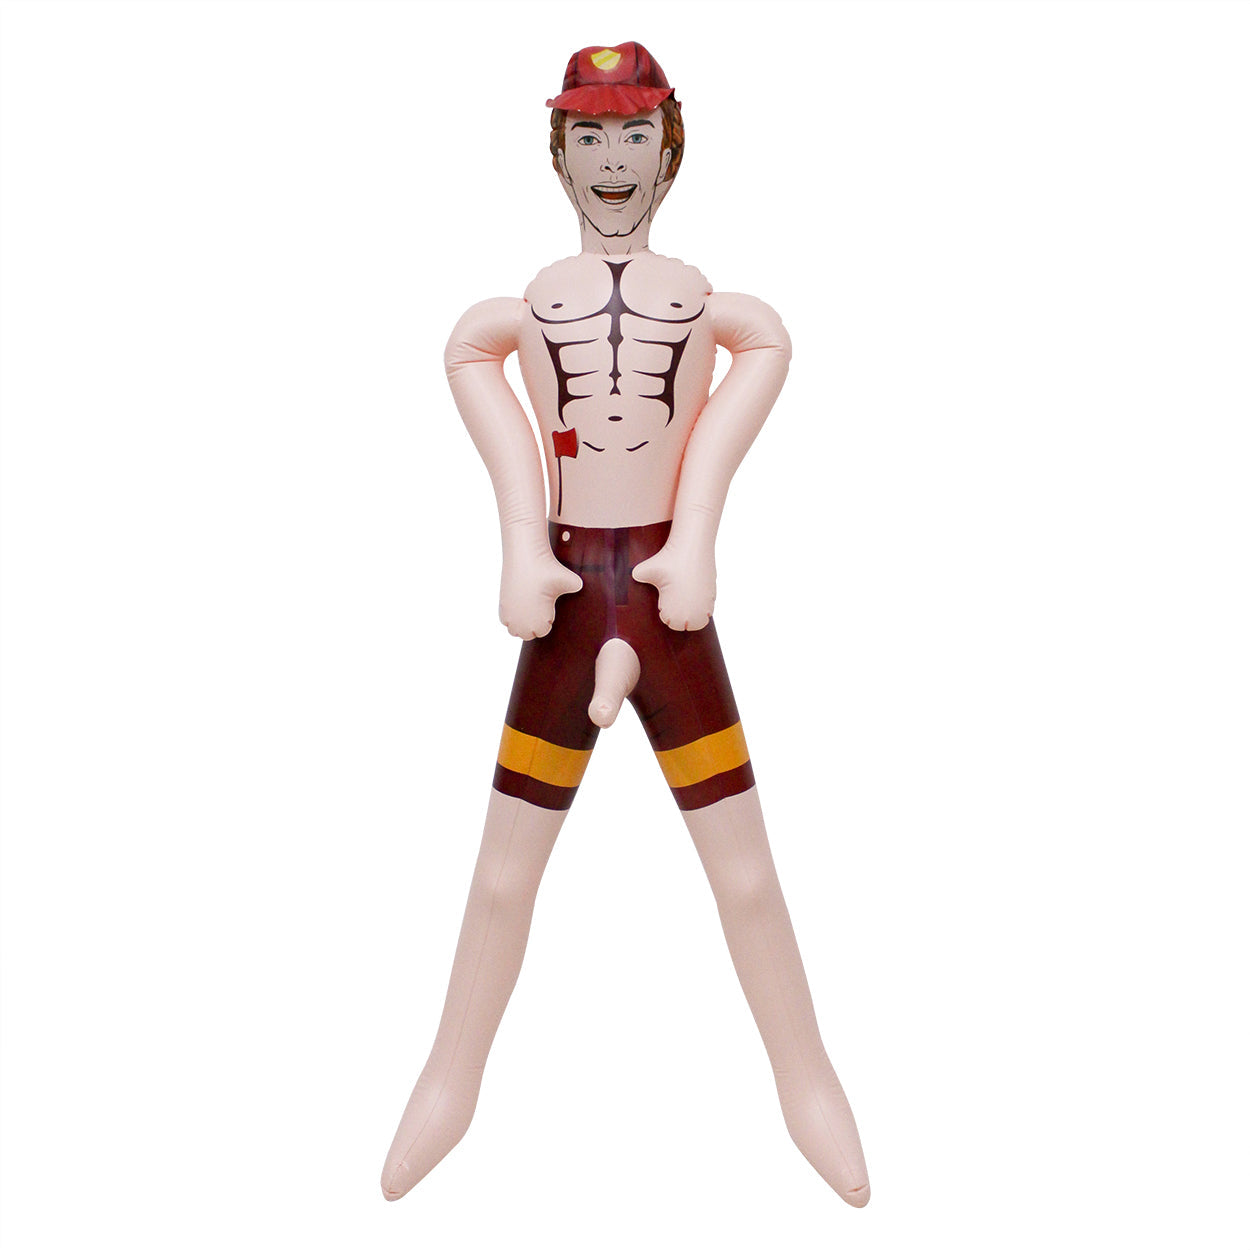 Image of The Fireman Blow Up Doll - Soft Penis